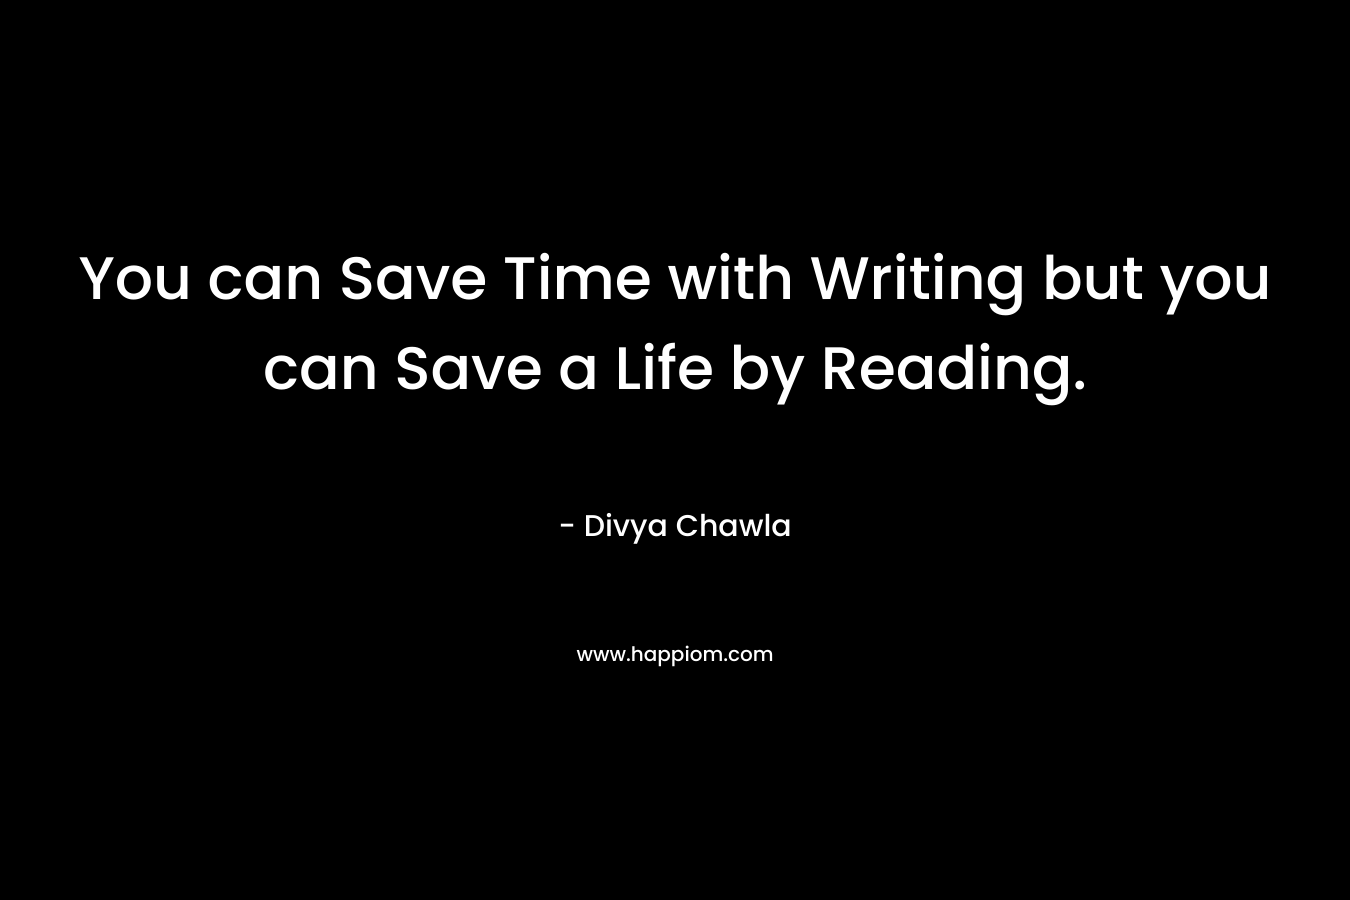 You can Save Time with Writing but you can Save a Life by Reading.